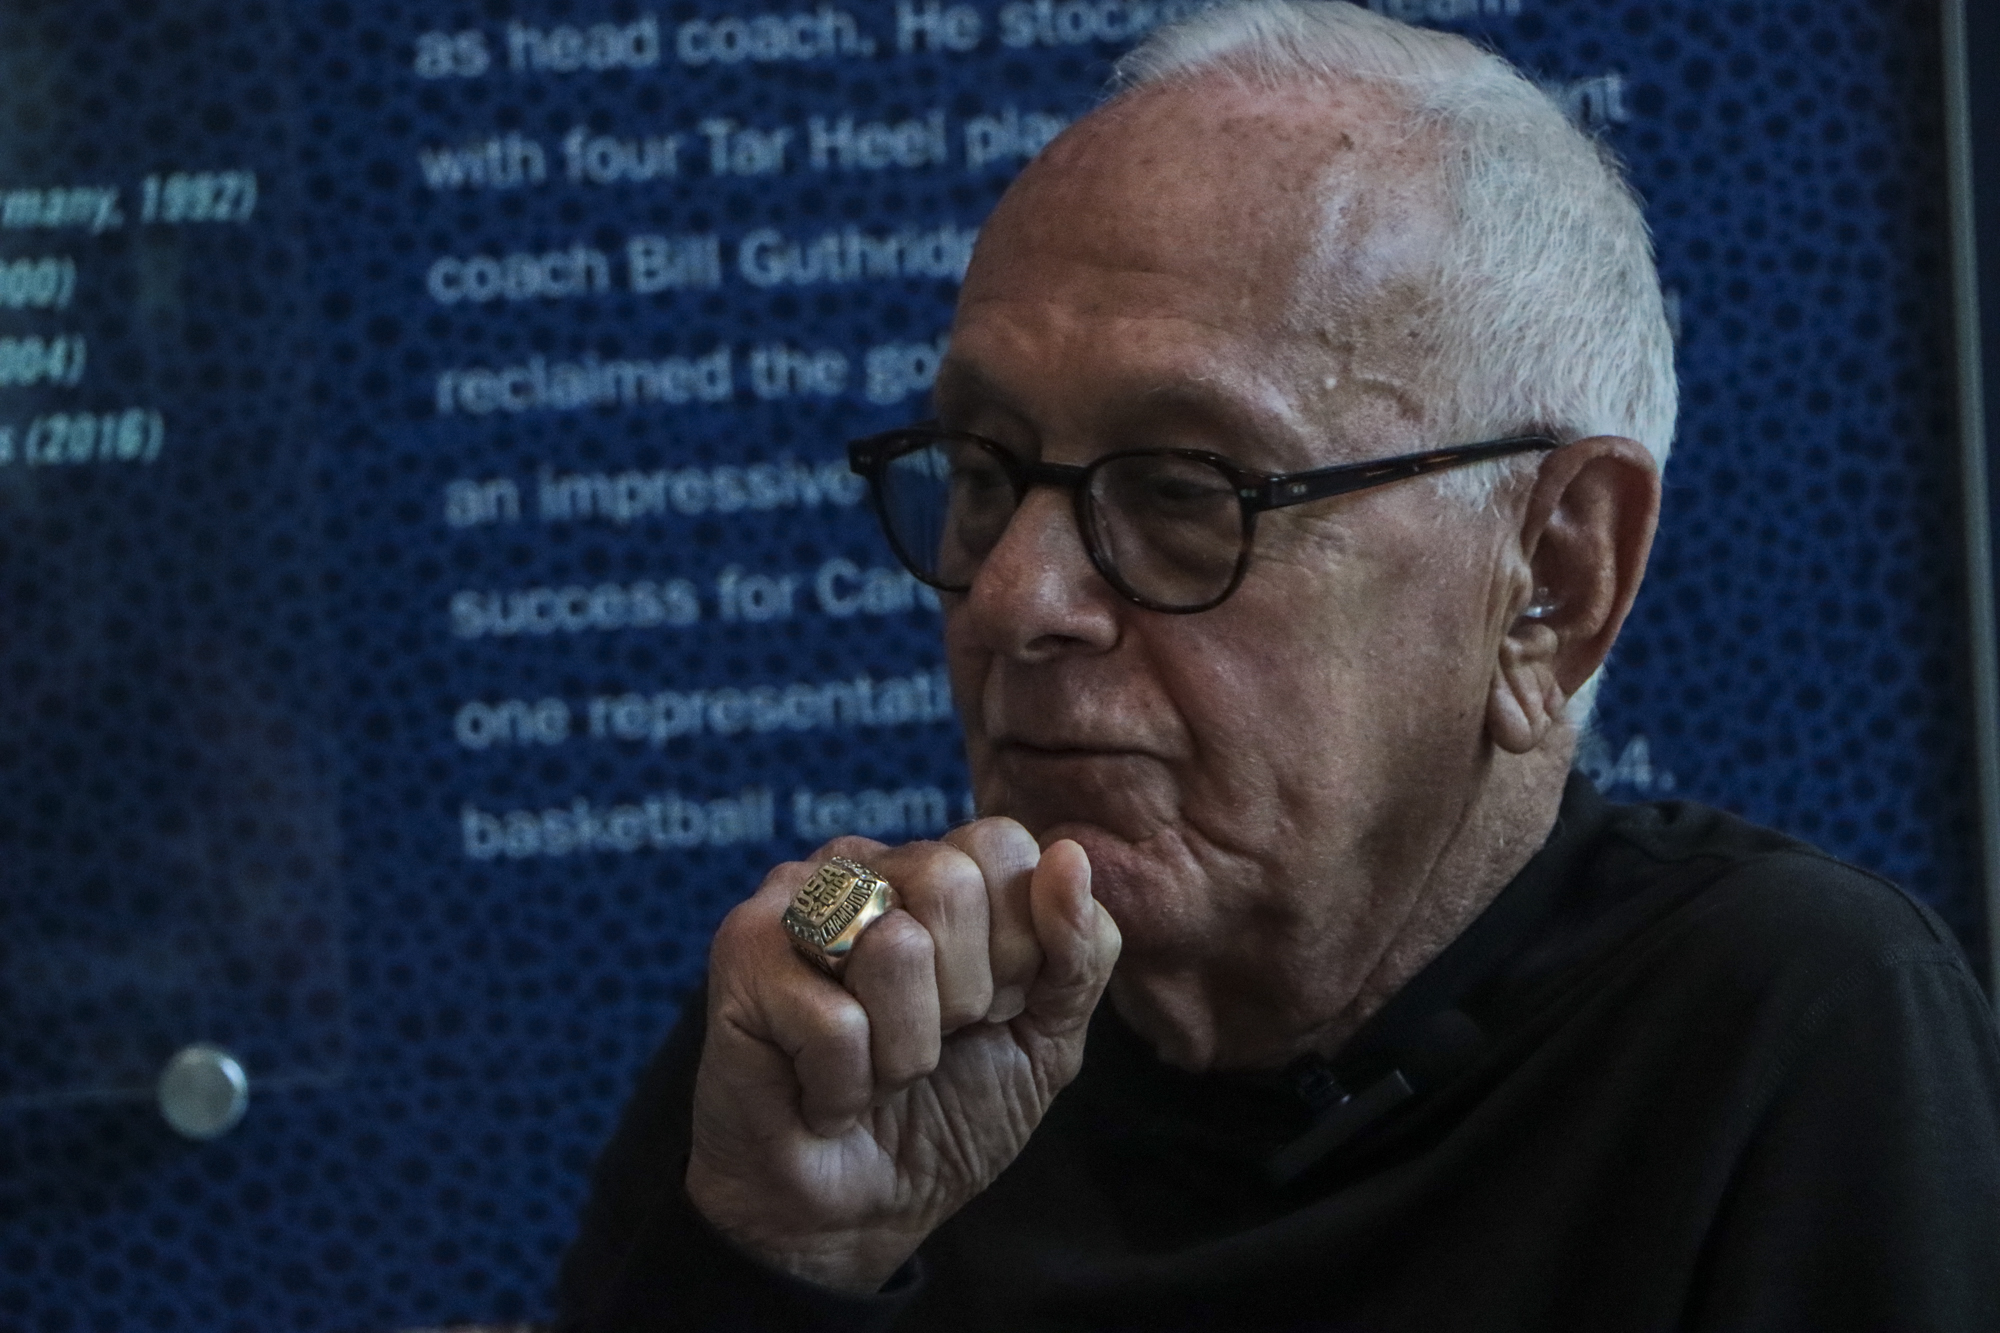 Keeping his competitive edge, the life of Larry Brown